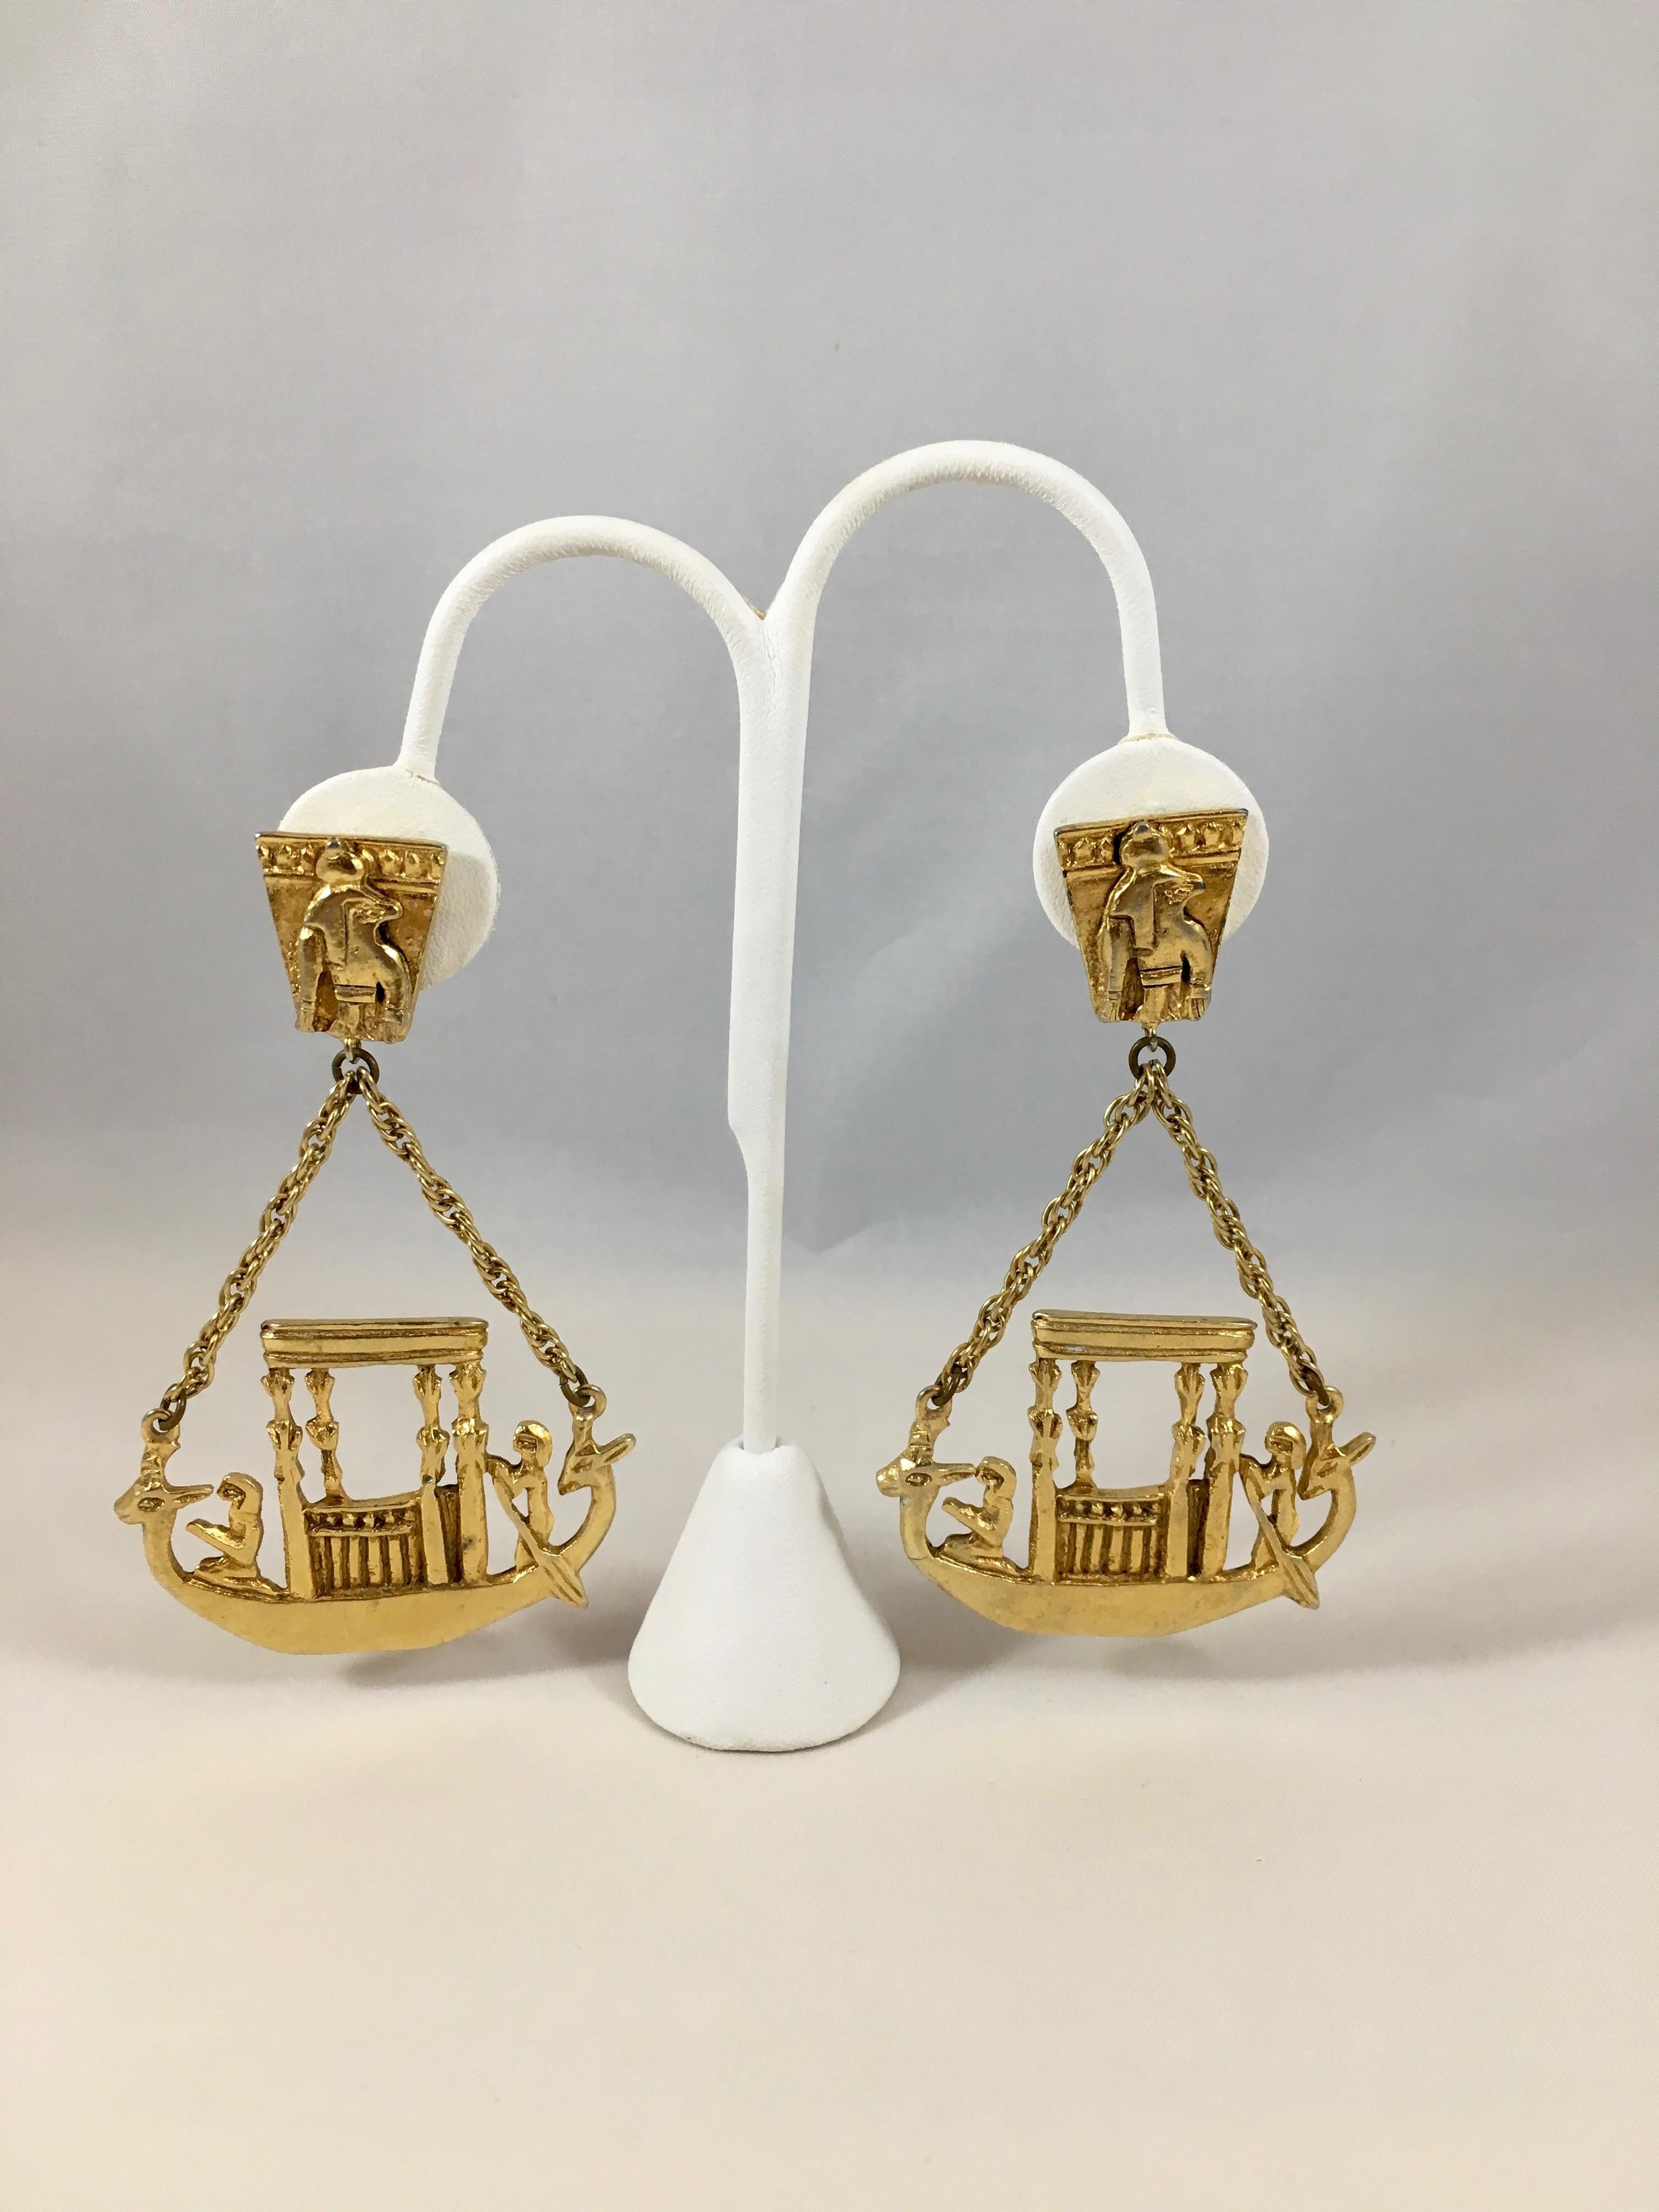 This is a show stopping pair of 1970s Kenneth Jay Lane Egyptian themed dangle earrings. They are gold-toned and each feature an ancient Egyptian ship with Egyptian gods on board. The earrings measure 3 1/2 inches long x 2 inches wide. They are in